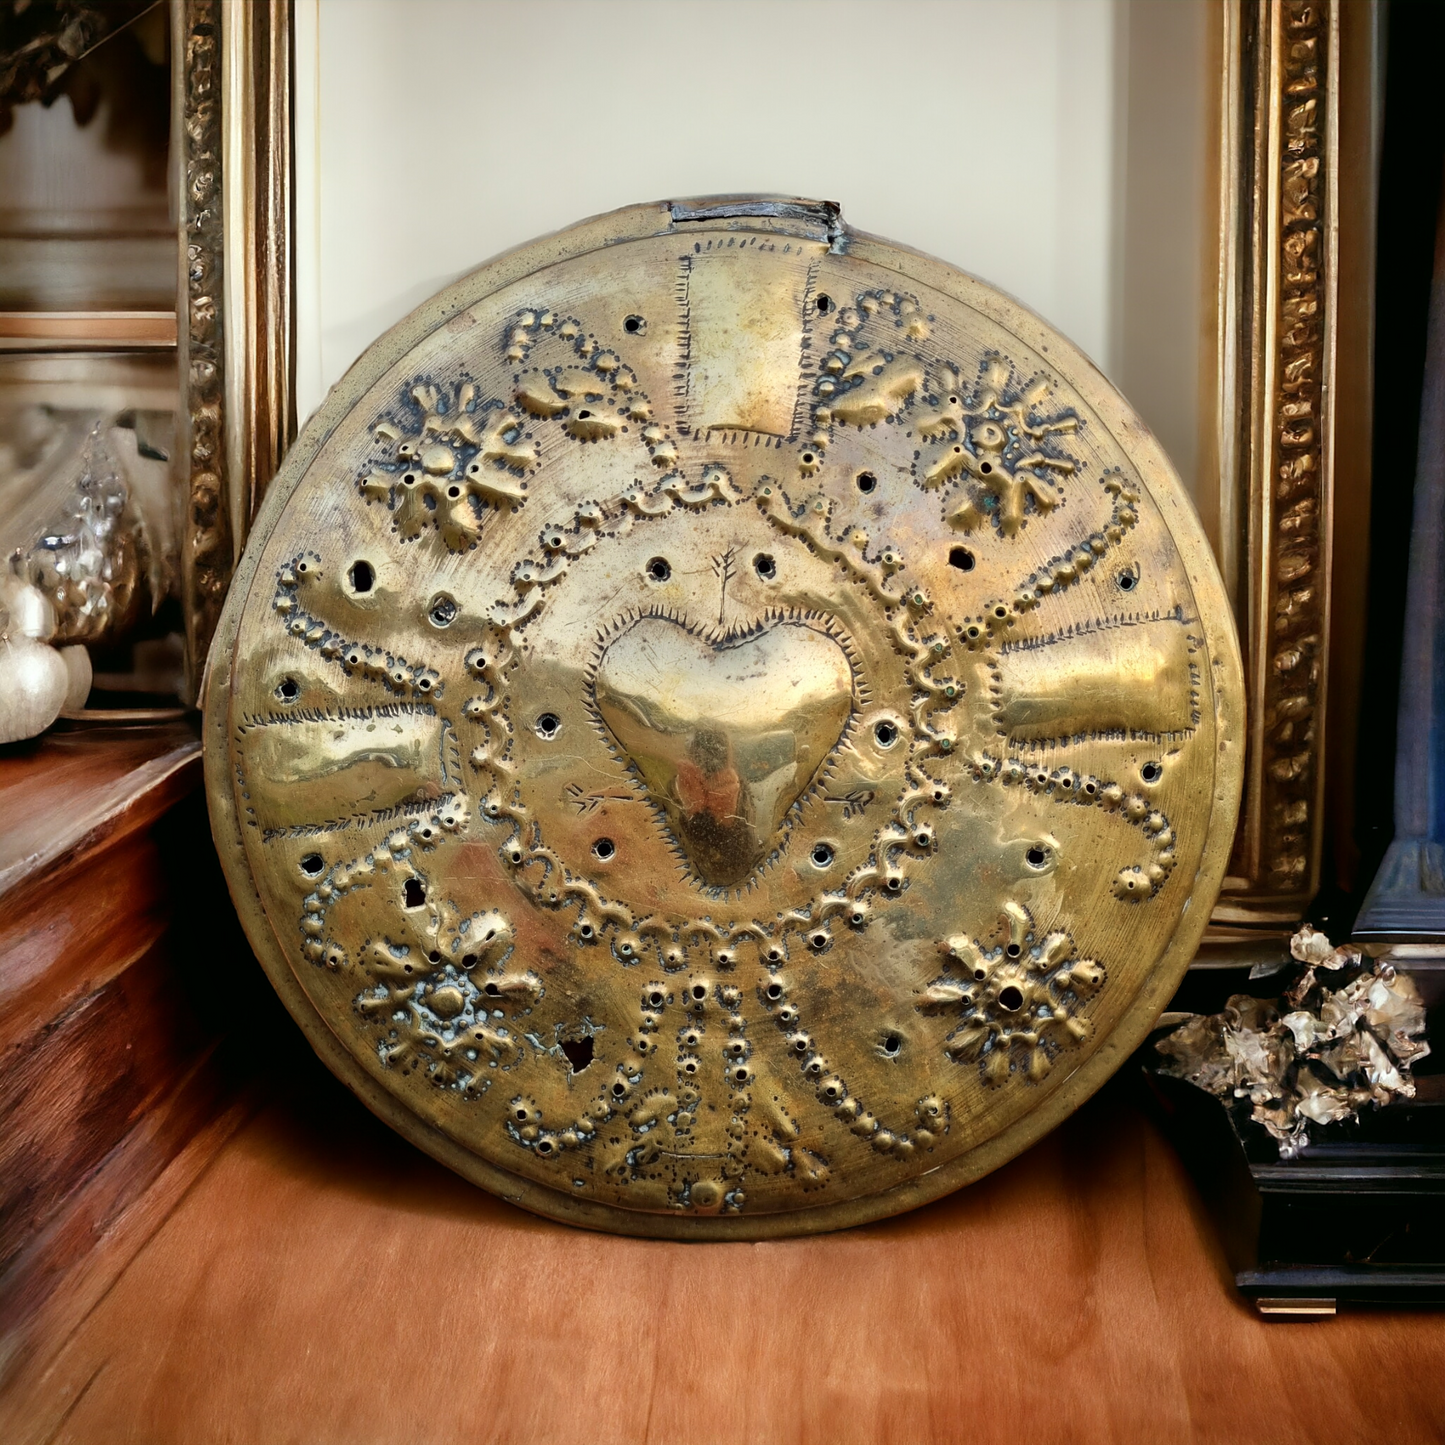 17thC Scottish Antique Brass Repousee-Worked Warming Pan Lid Decorated With A Love Heart